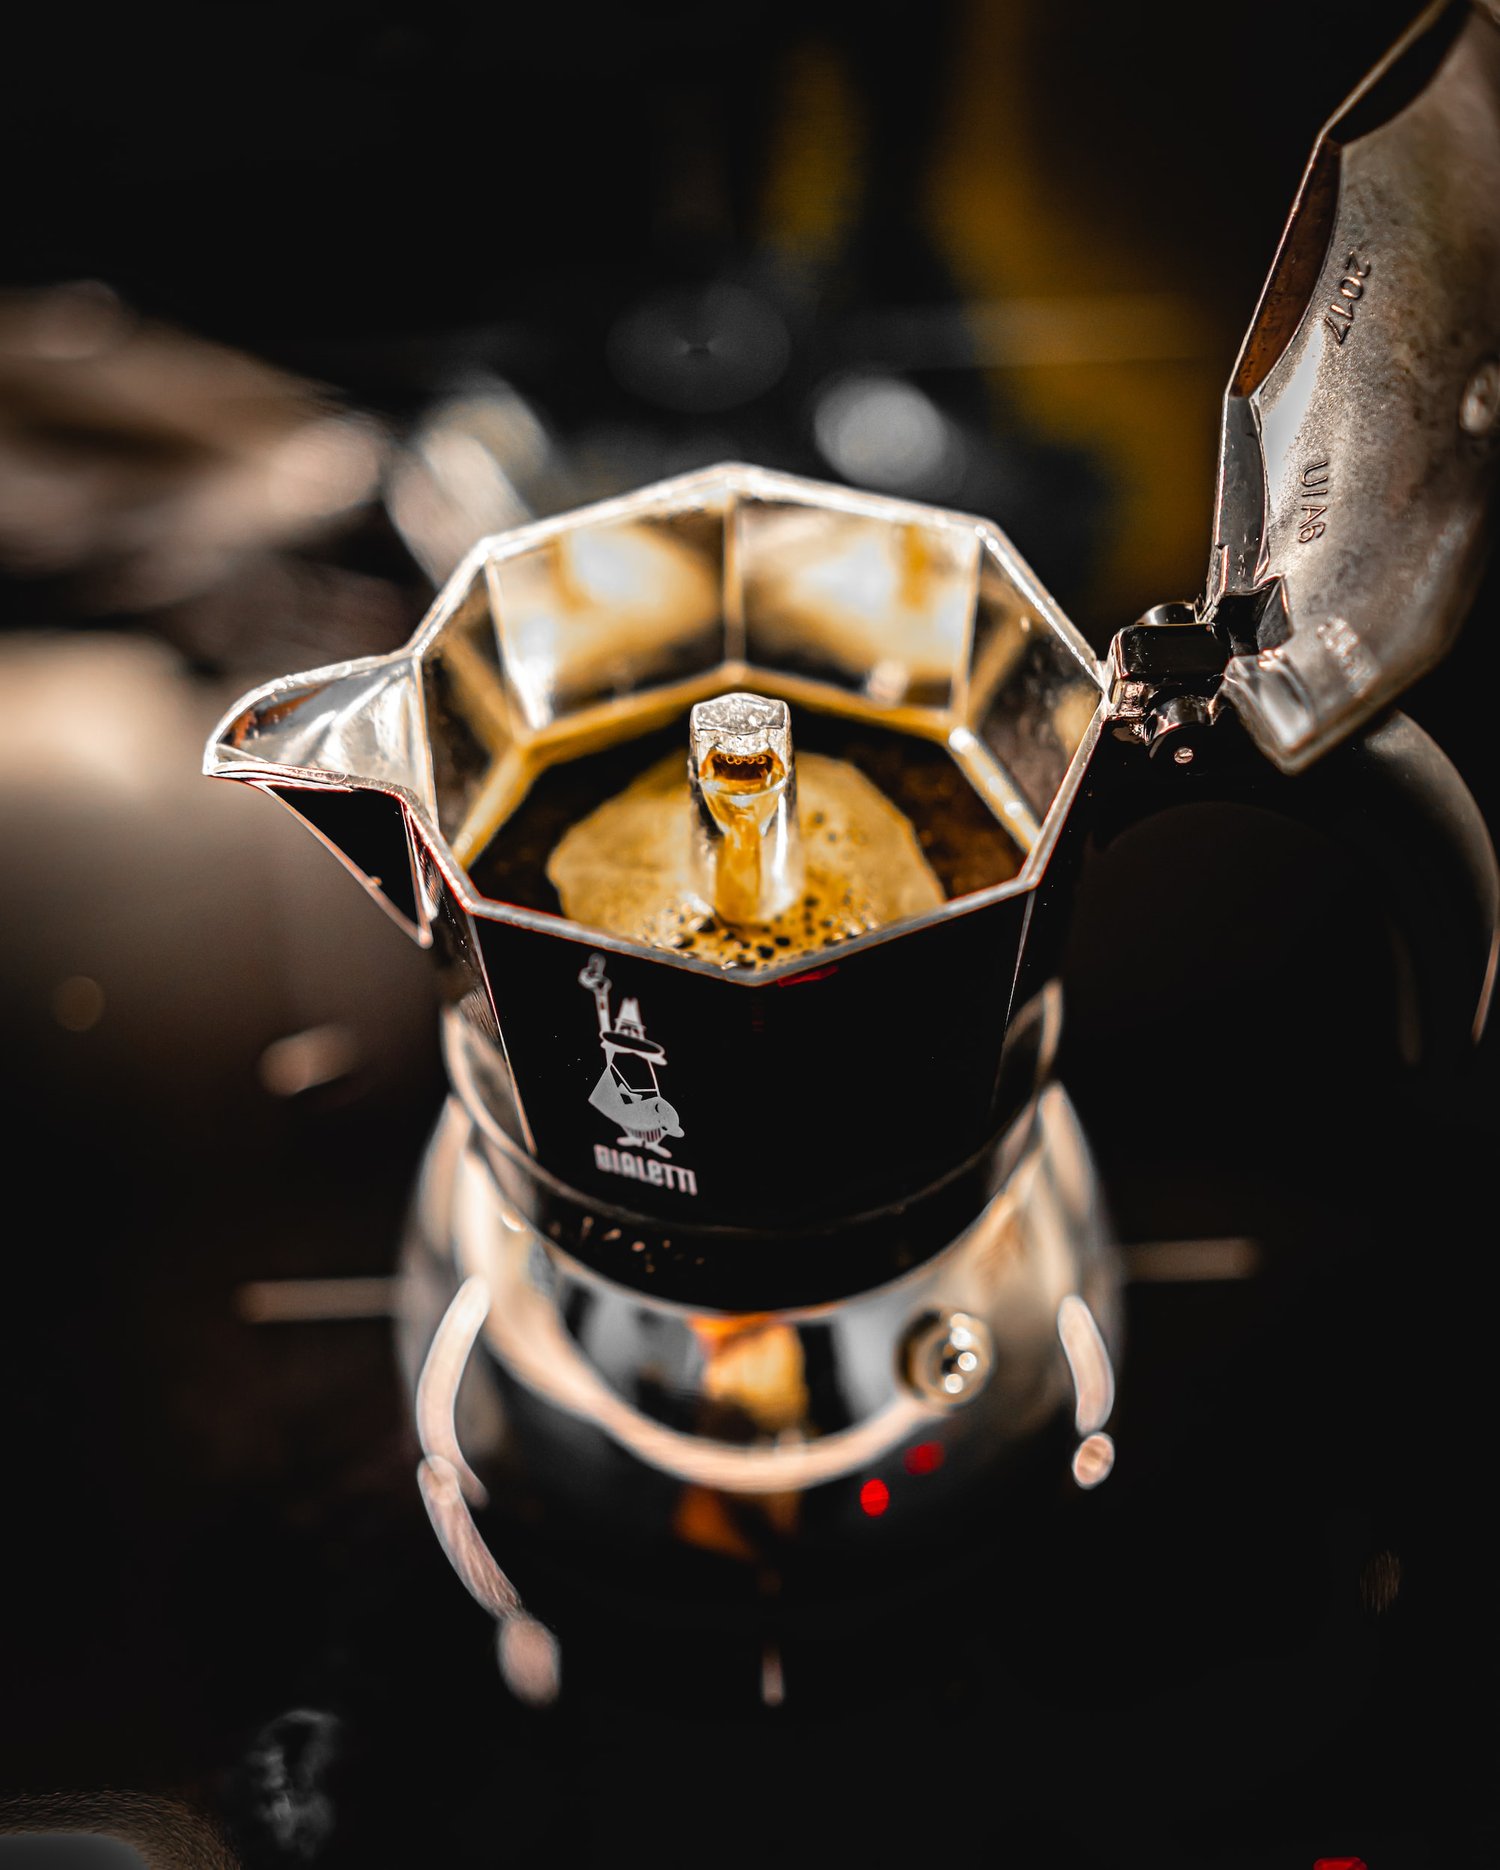 Bialetti coffee makers: all the formats